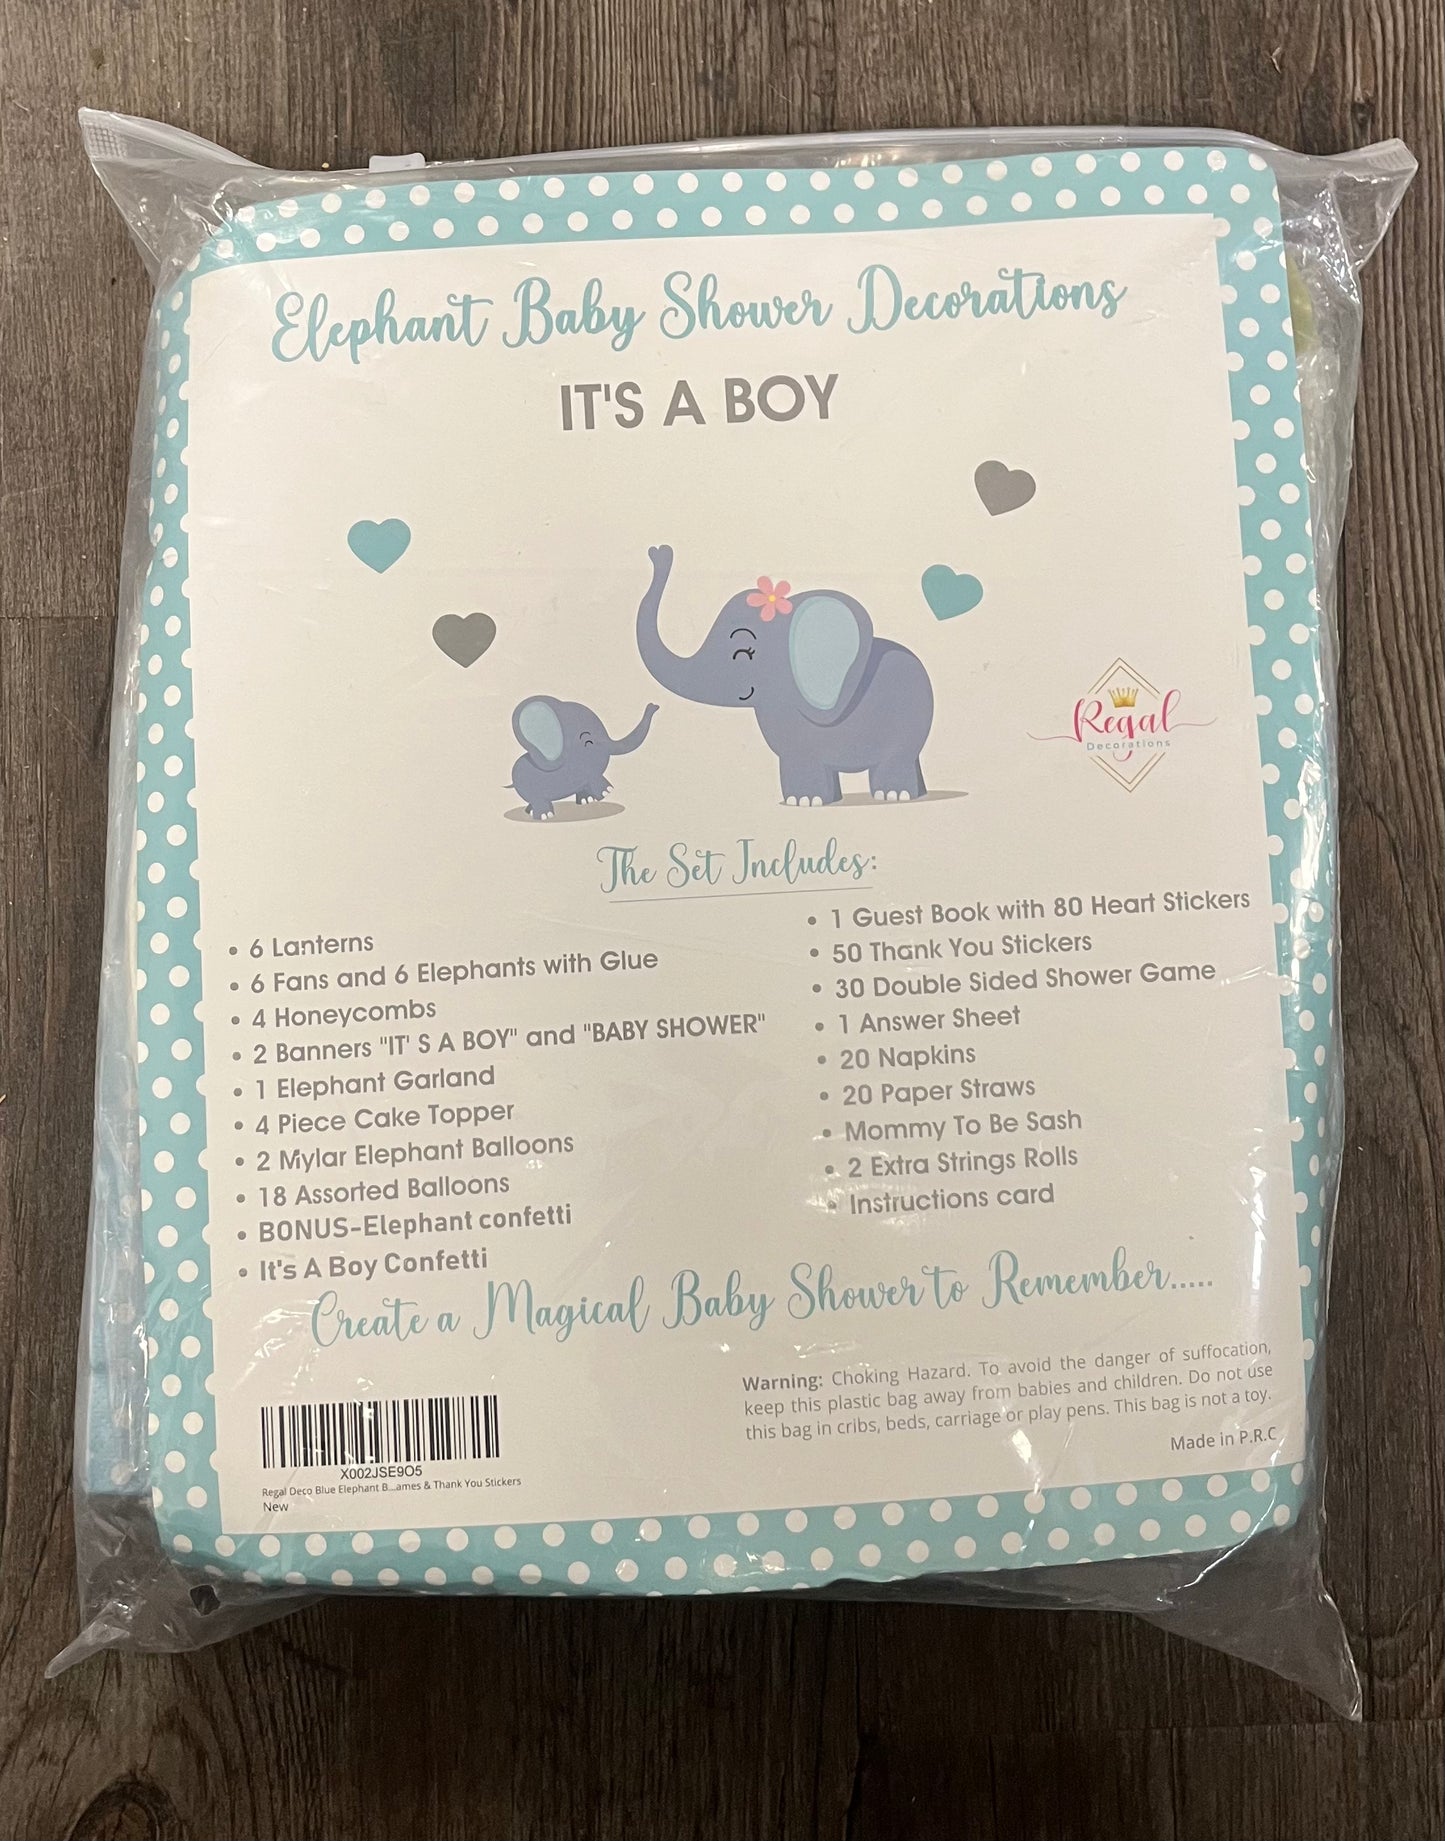 597 Piece Blue Elephant Baby Shower Decorations for Boy Kit